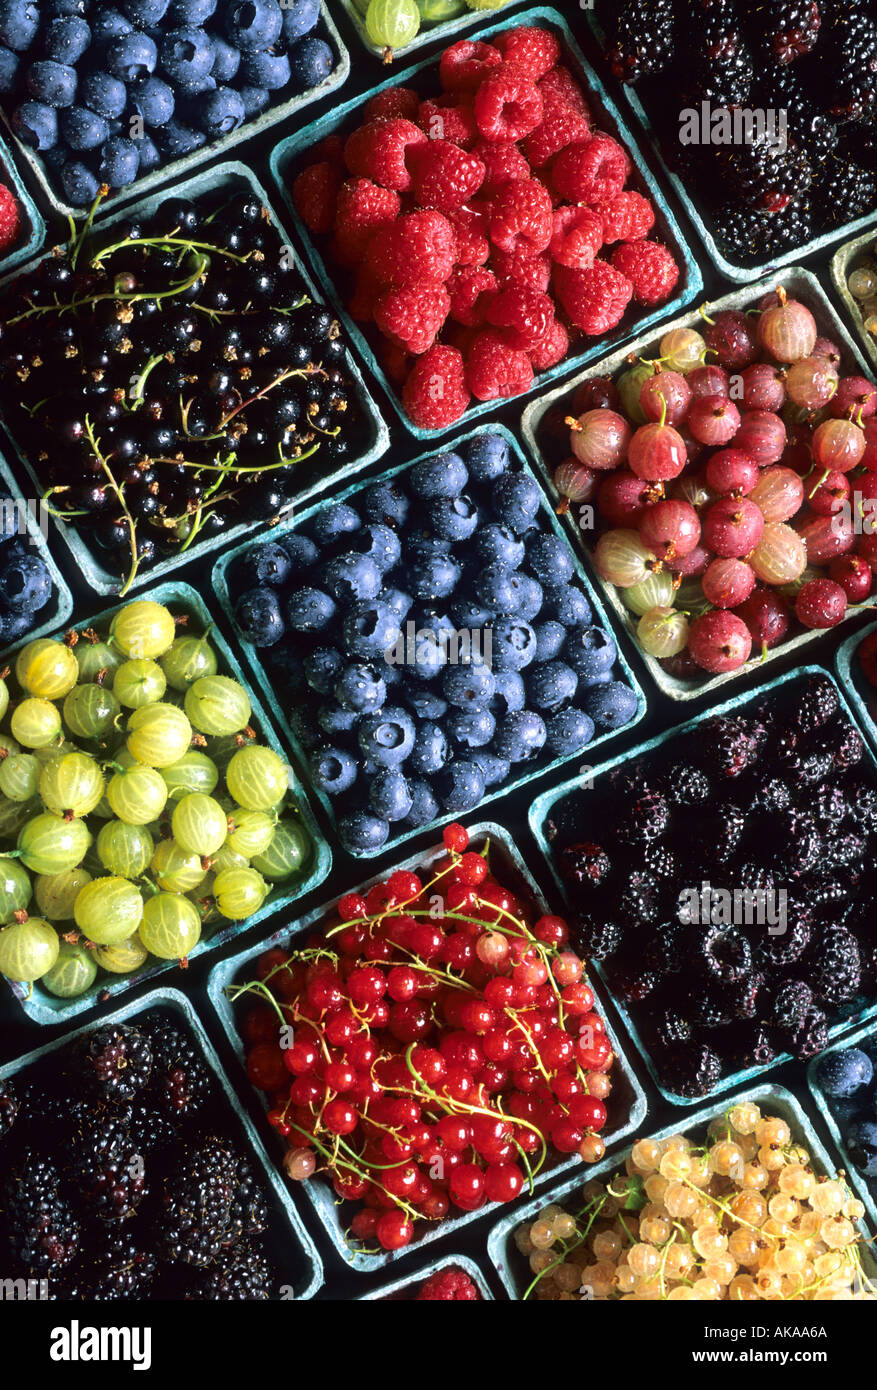 baskets of several different varieties of berries Stock Photo